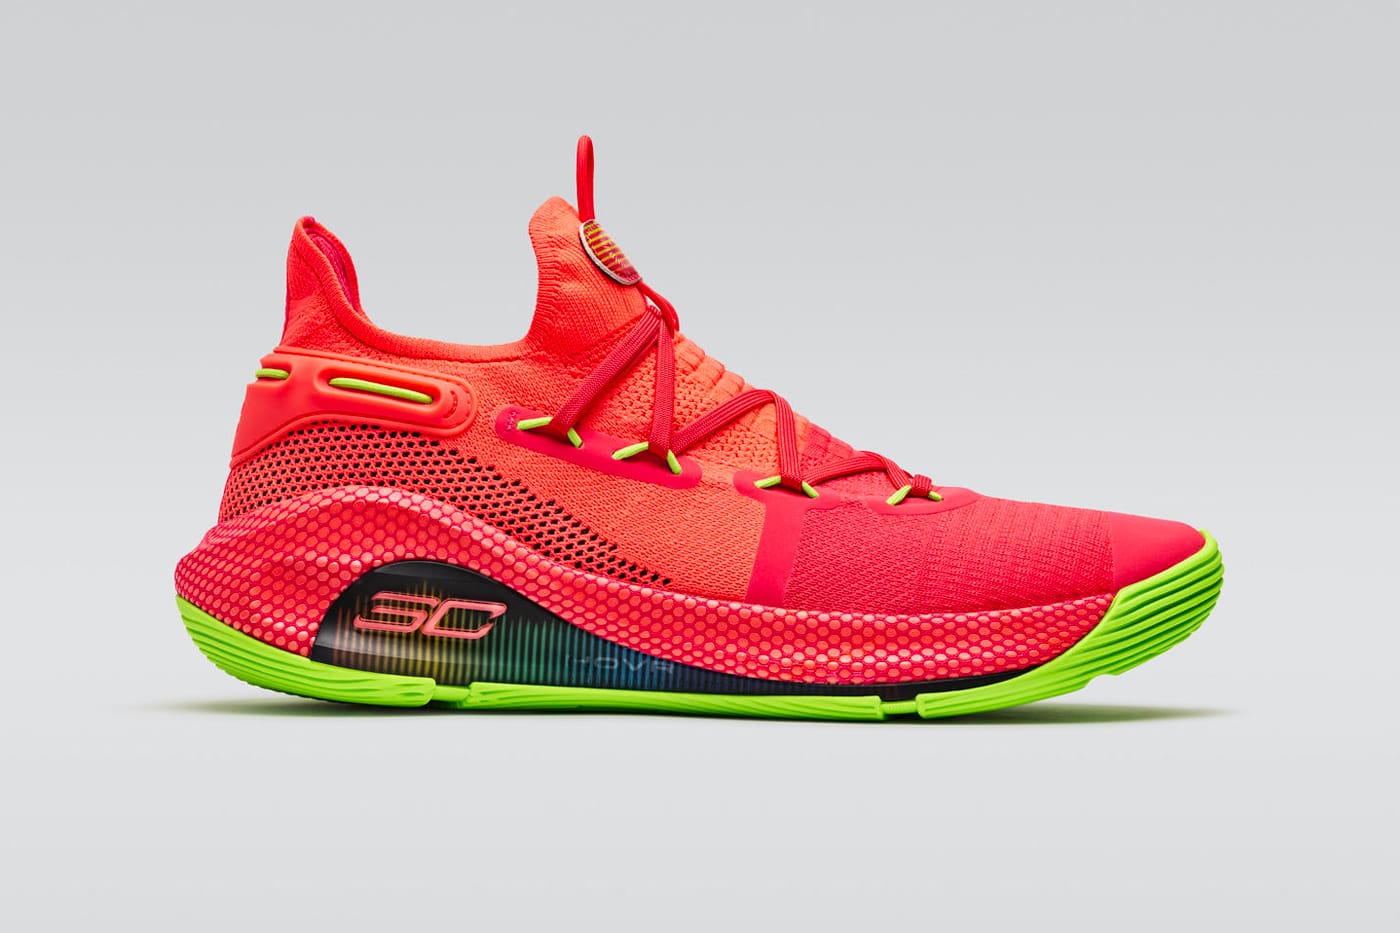 Under Armour Curry 6 “Roaracle” Release 